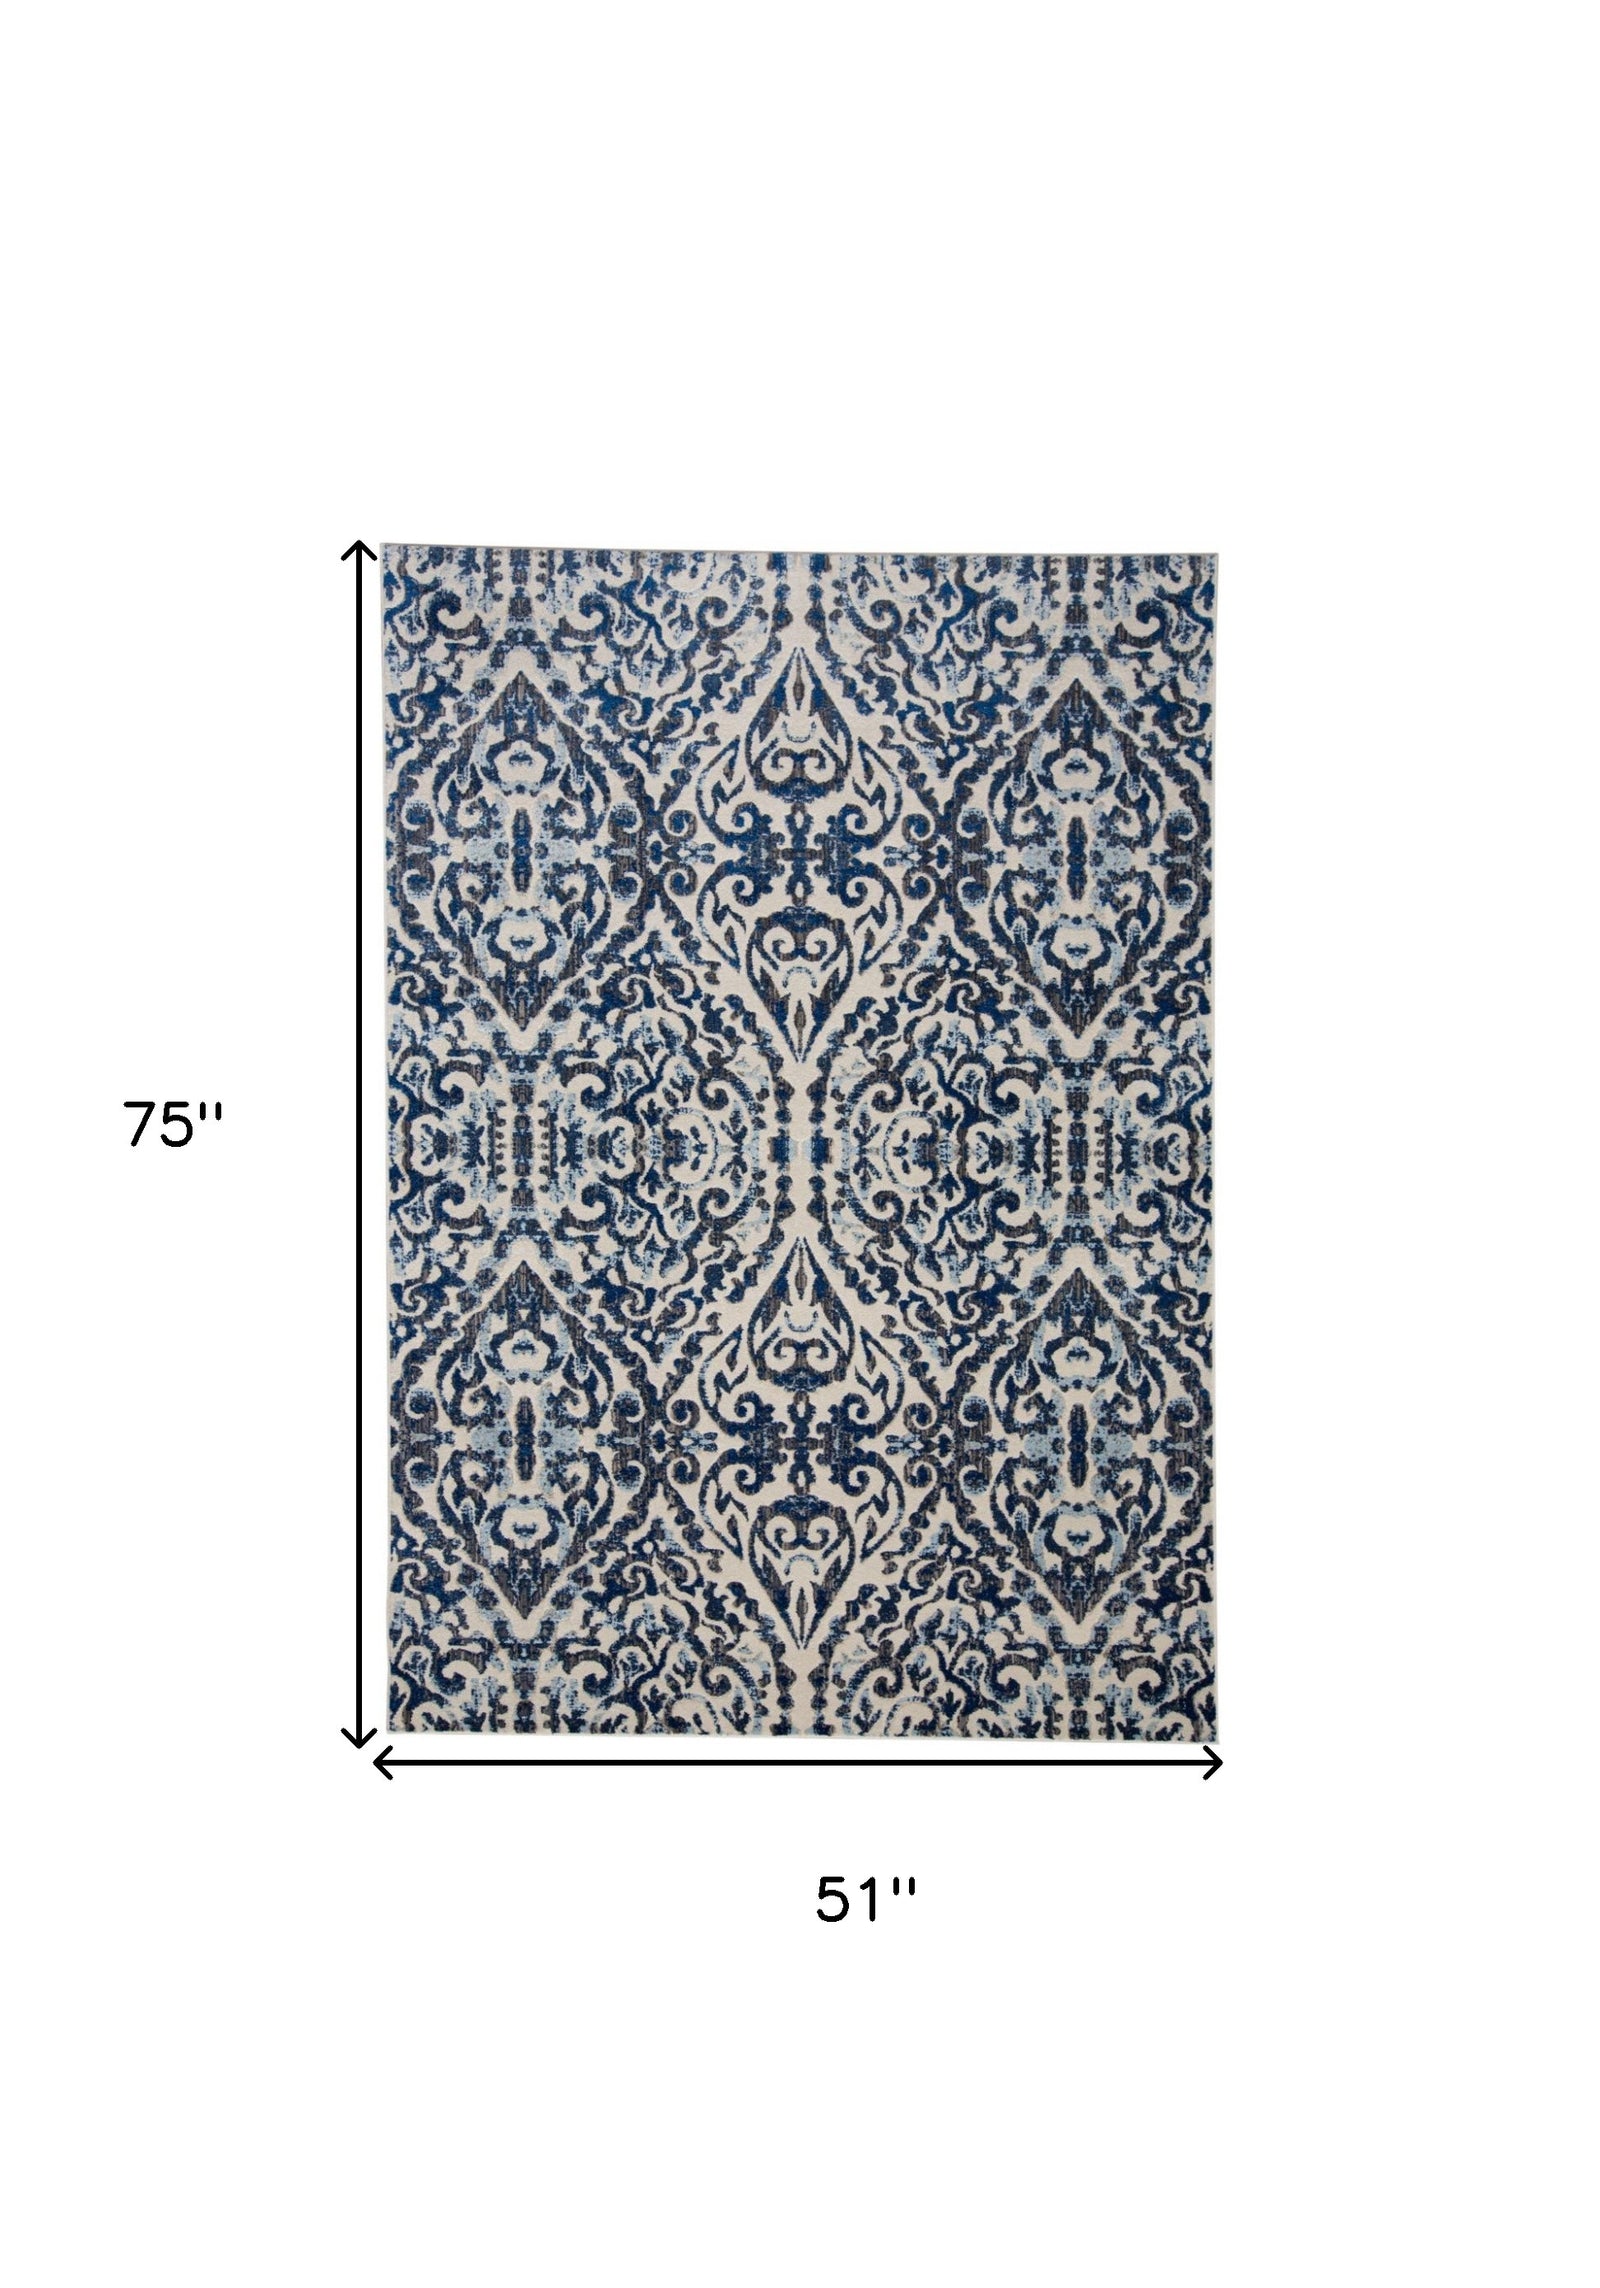 Blue Ivory And Black Floral Distressed Stain Resistant Area Rug - 2' X 4'